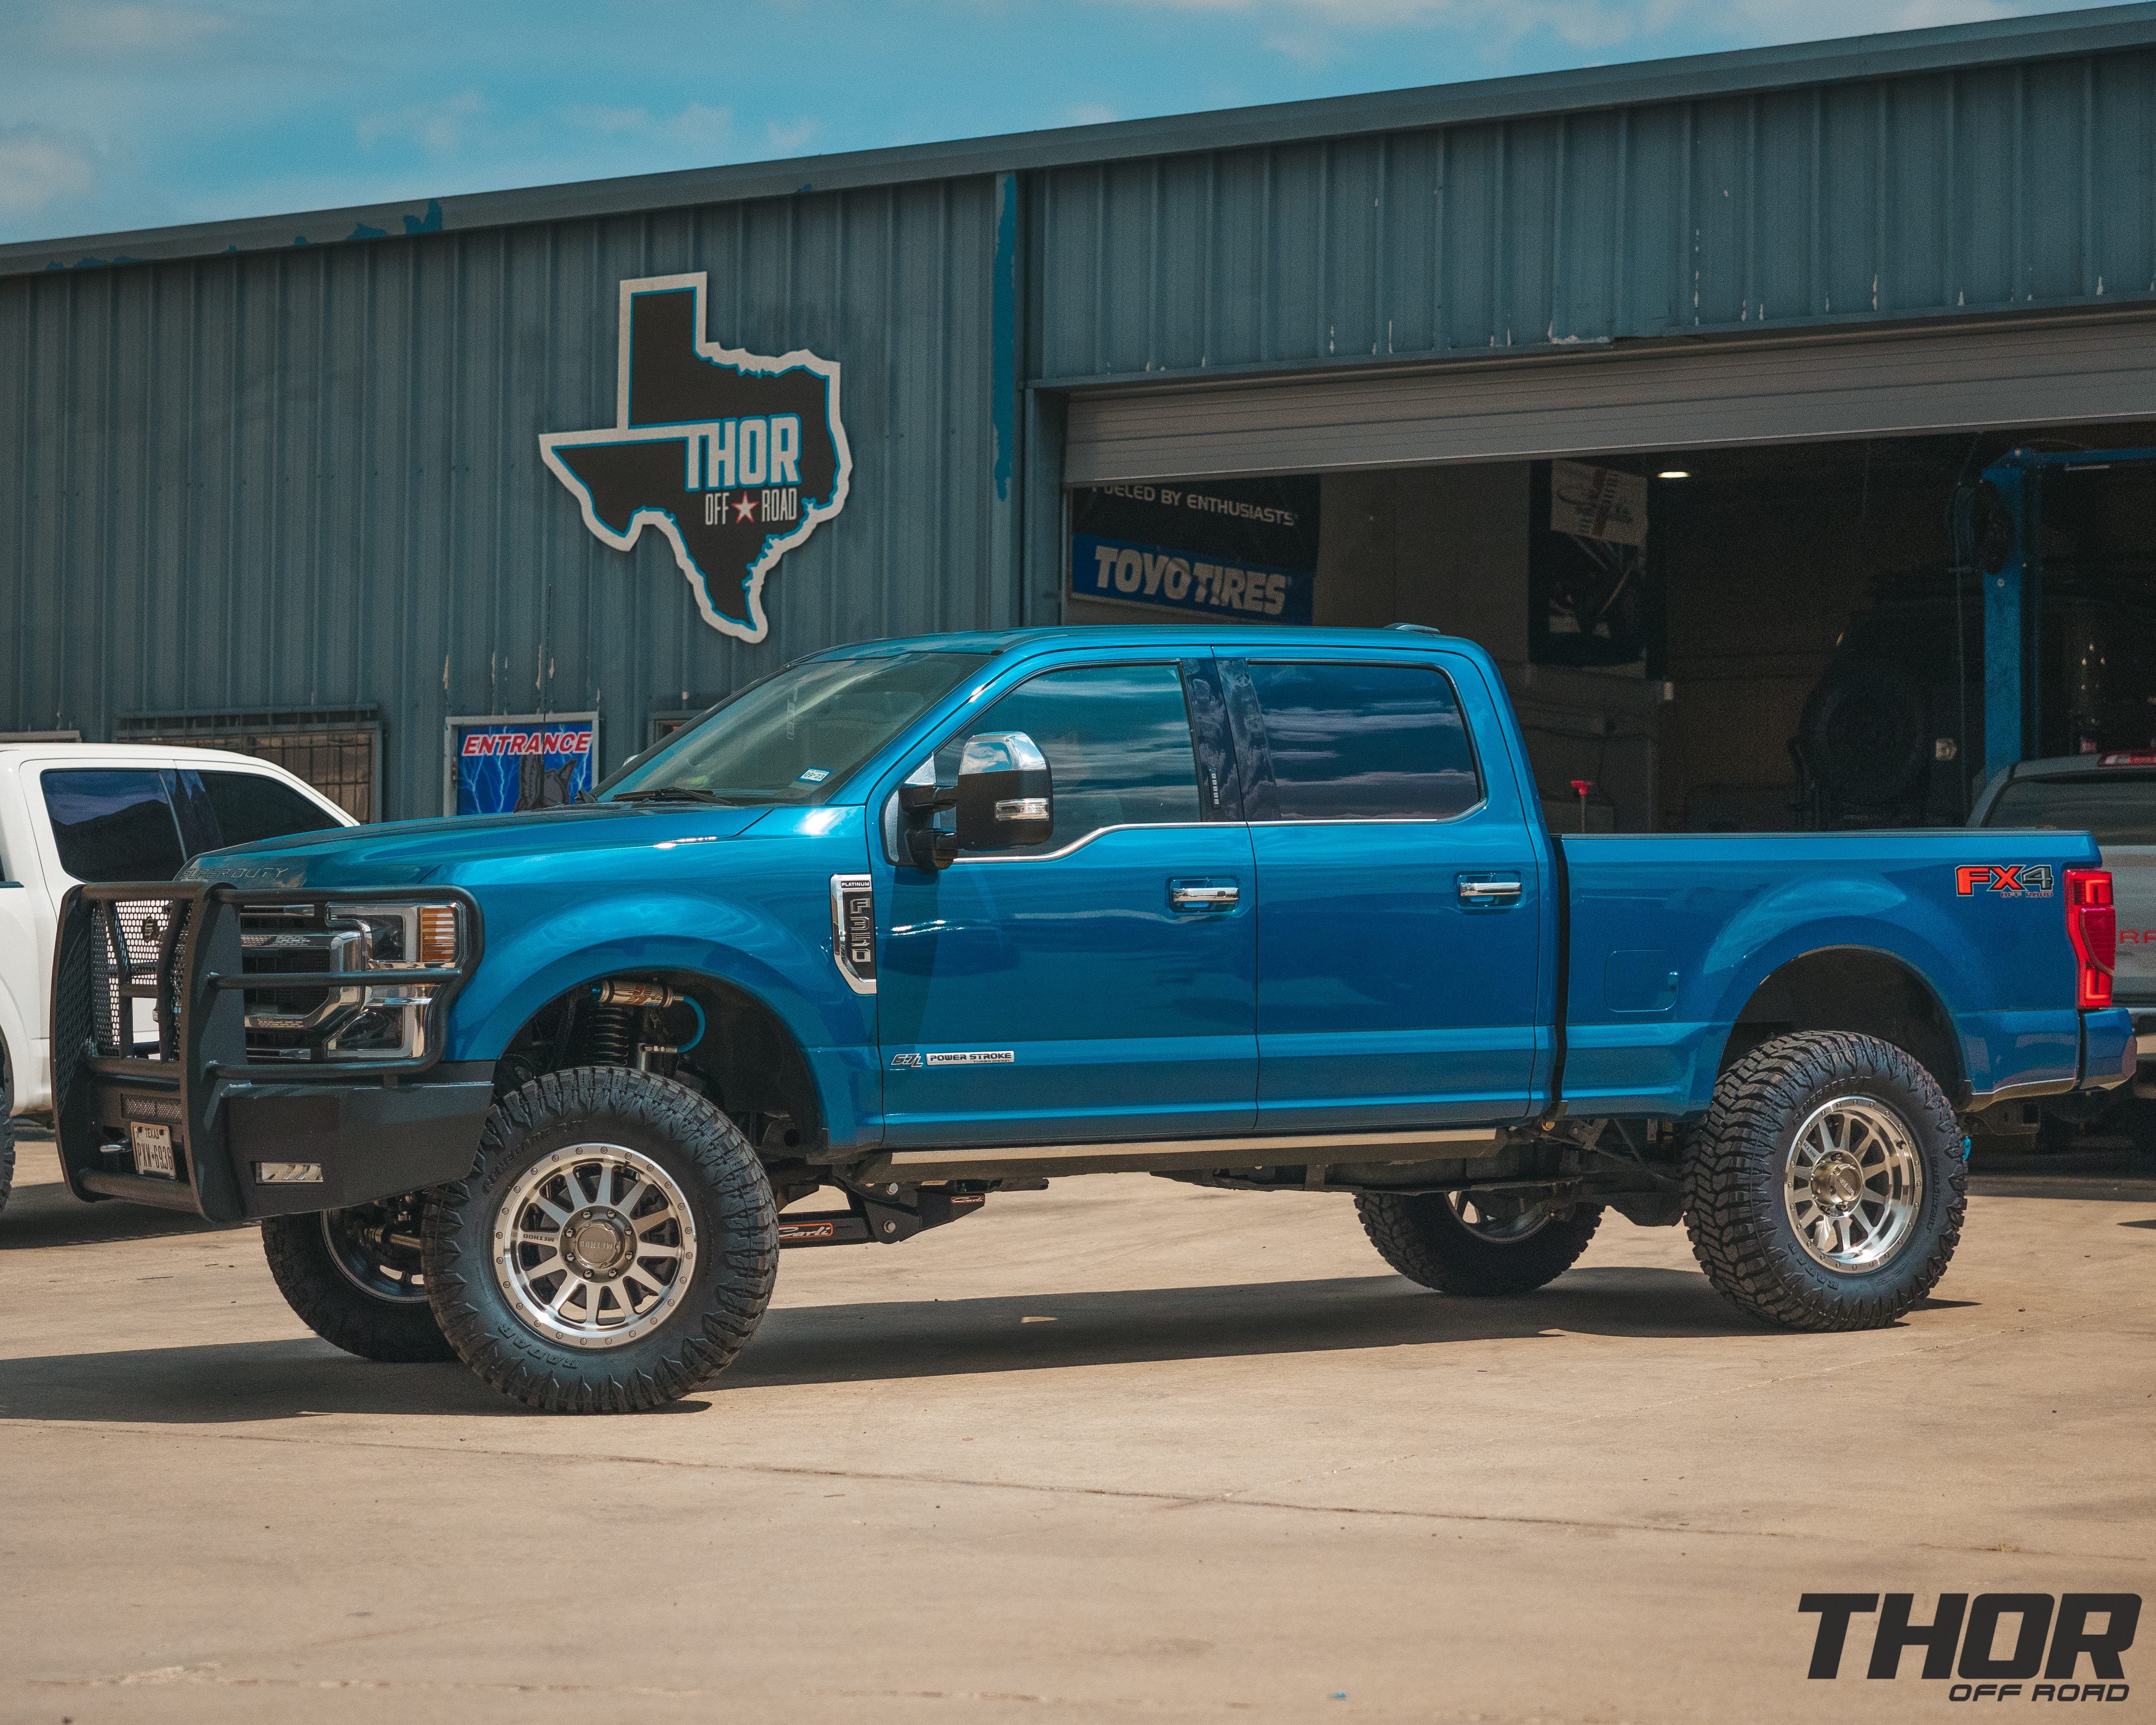 2022 Ford F-350 Super Duty Platinum in Atlas Blue with Carli 3.5" King Pintop Suspension Kit, Carli Radius Arms, Carli Torsion Sway Bar, Full Rear Leafs, Steelcraft Front Bumper, 20" Method Machined Standards, 37x13.50R20 Tires